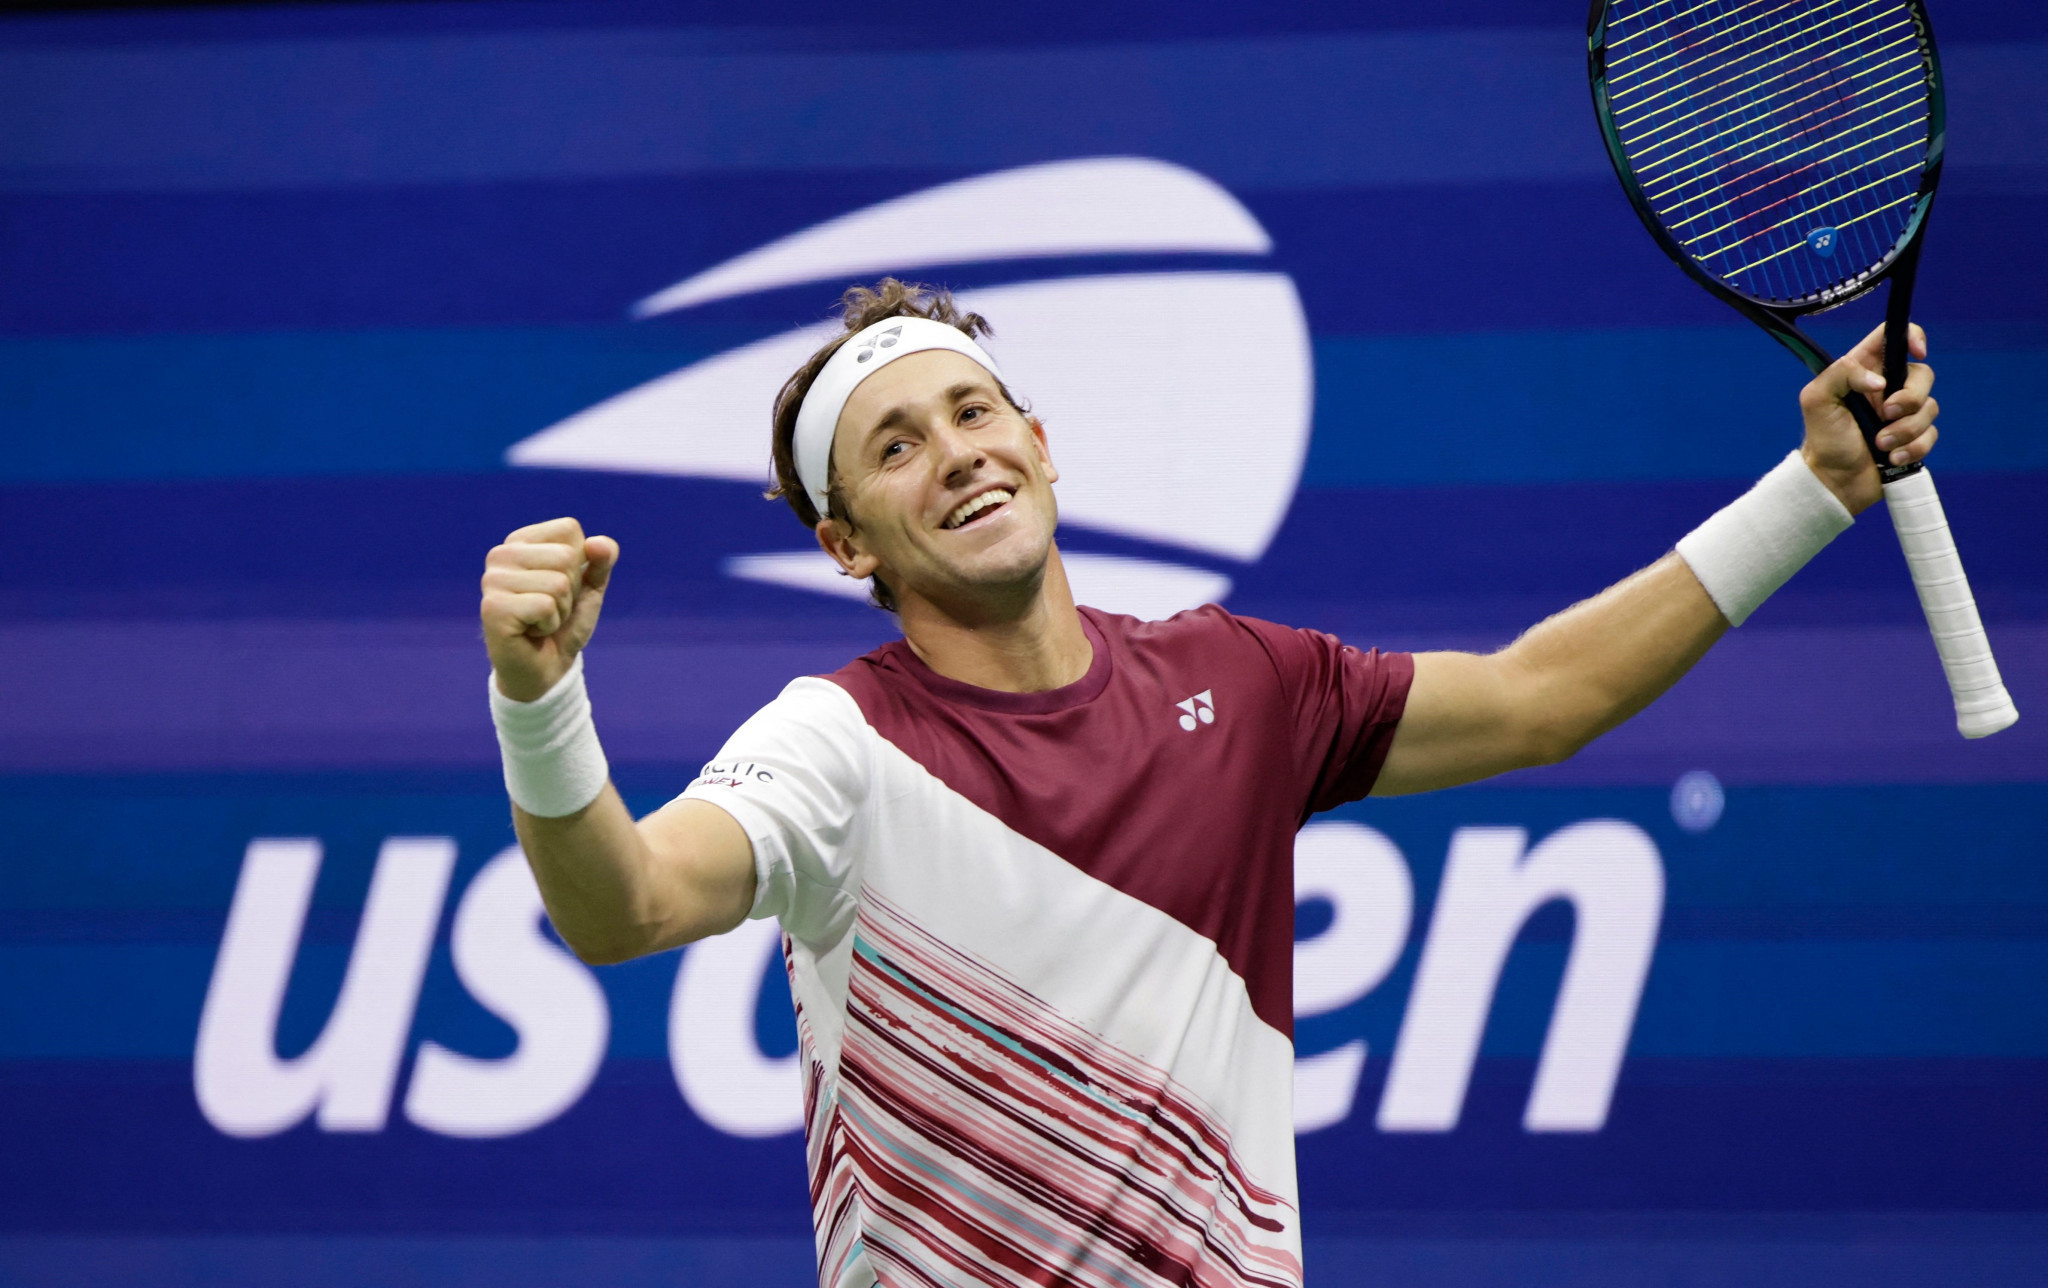 Ruud eyeing number one spot after crushing US Open quarter-final win over Berrettini